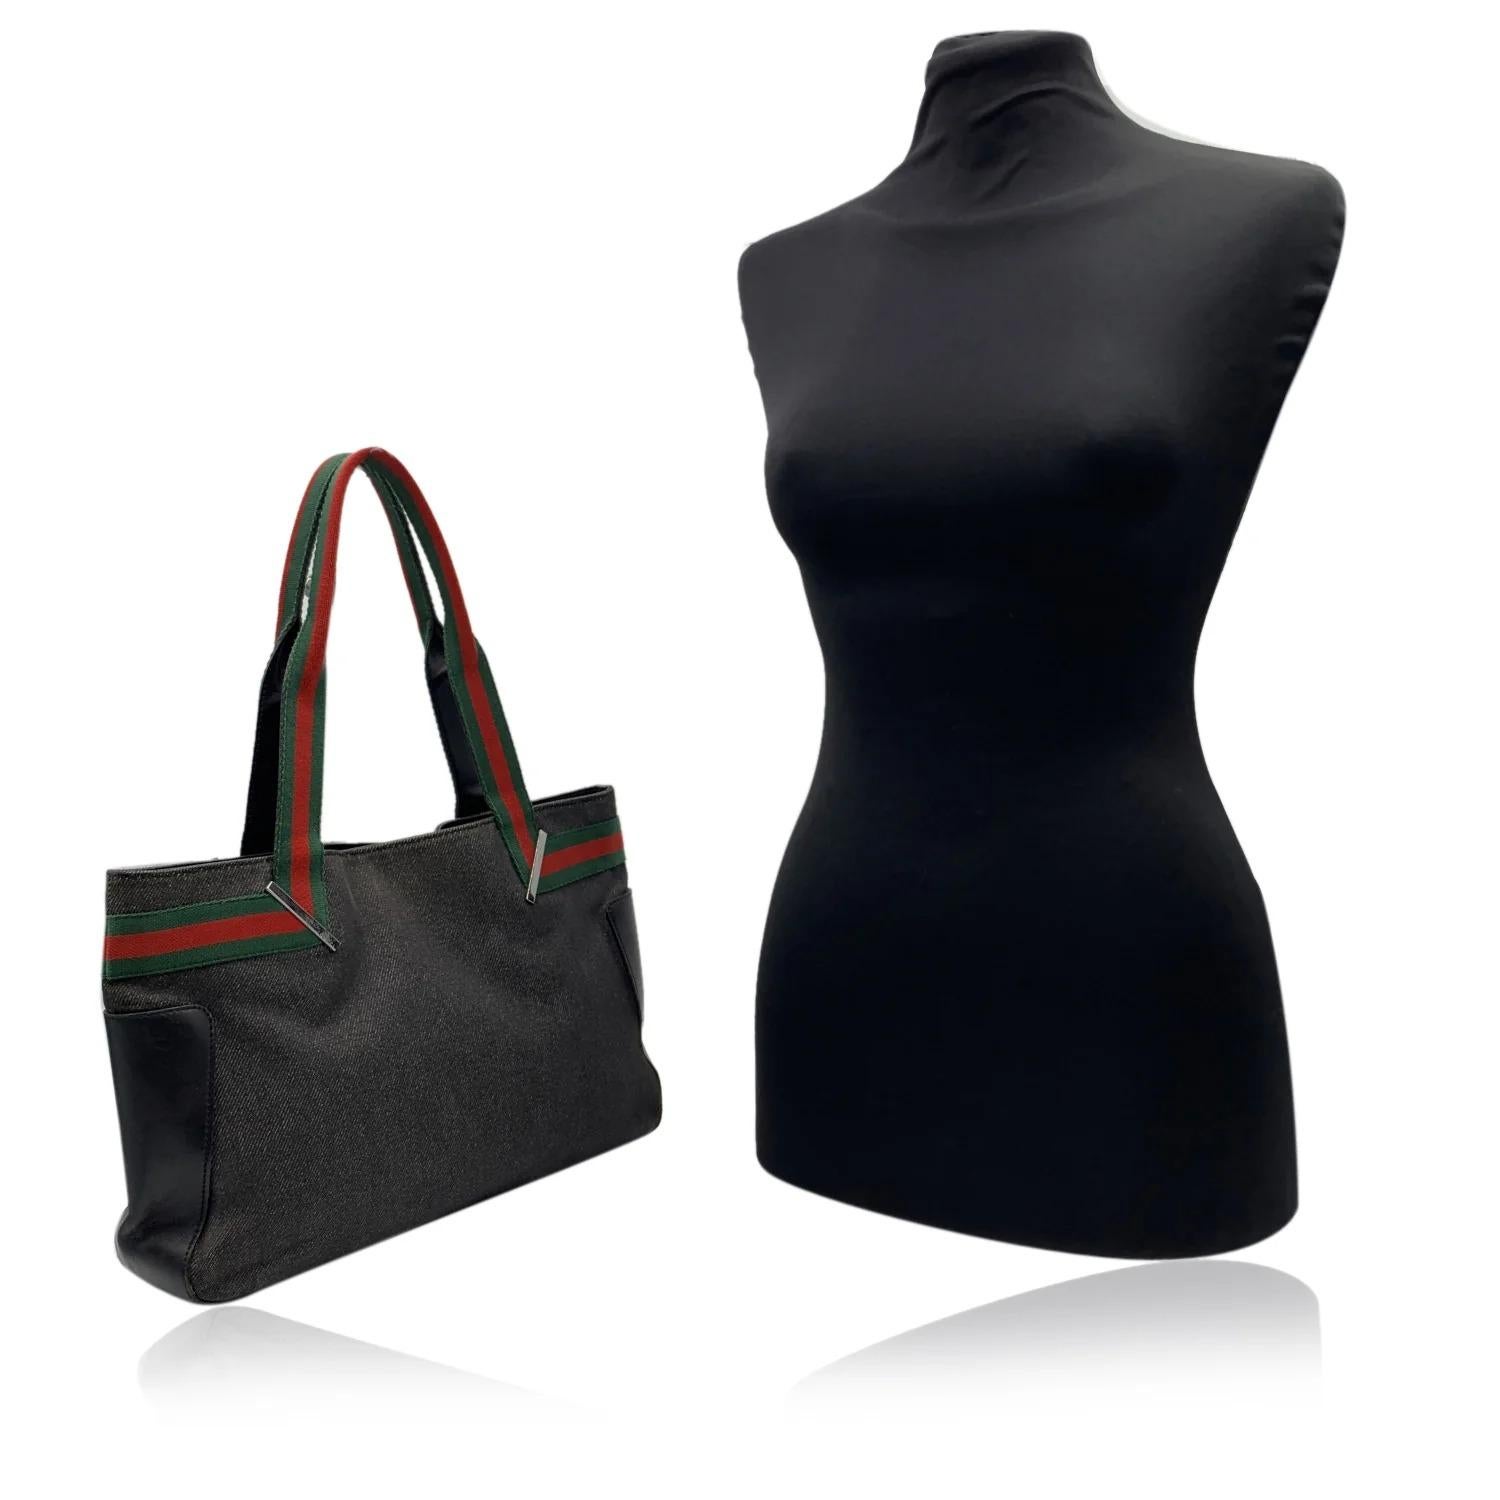 Beautiful Gucci black denim canvas tote. Green/Red/Green striped detailing on the front, on the back and on handles. Black monogram lining. 1 side zip pocket inside. 'Gucci - Made in Italy' tag on the front. (serial number on its reverse). Details